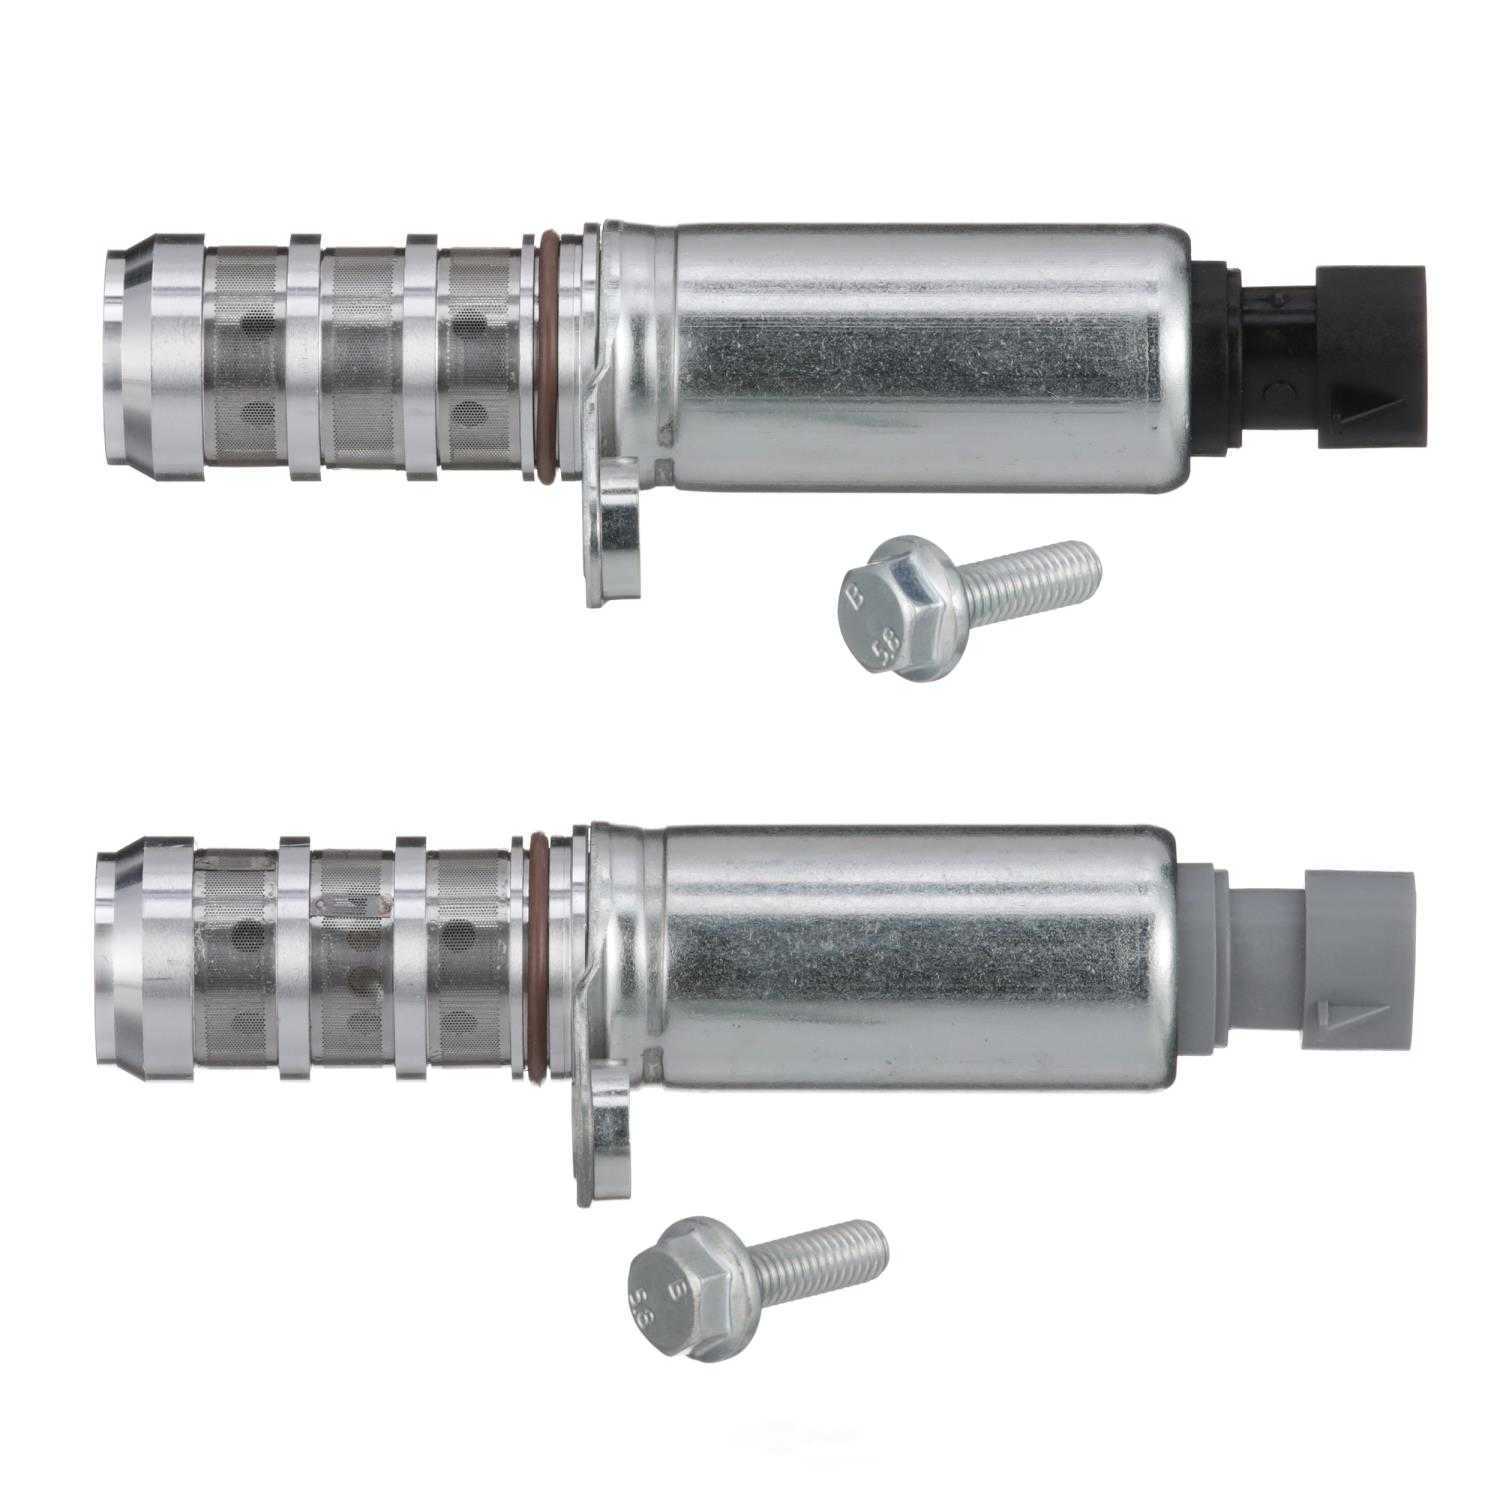 STANDARD MOTOR PRODUCTS - Engine Variable Valve Timing(VVT) Solenoid Kit (Intake and Exhaust) - STA VVT2000K